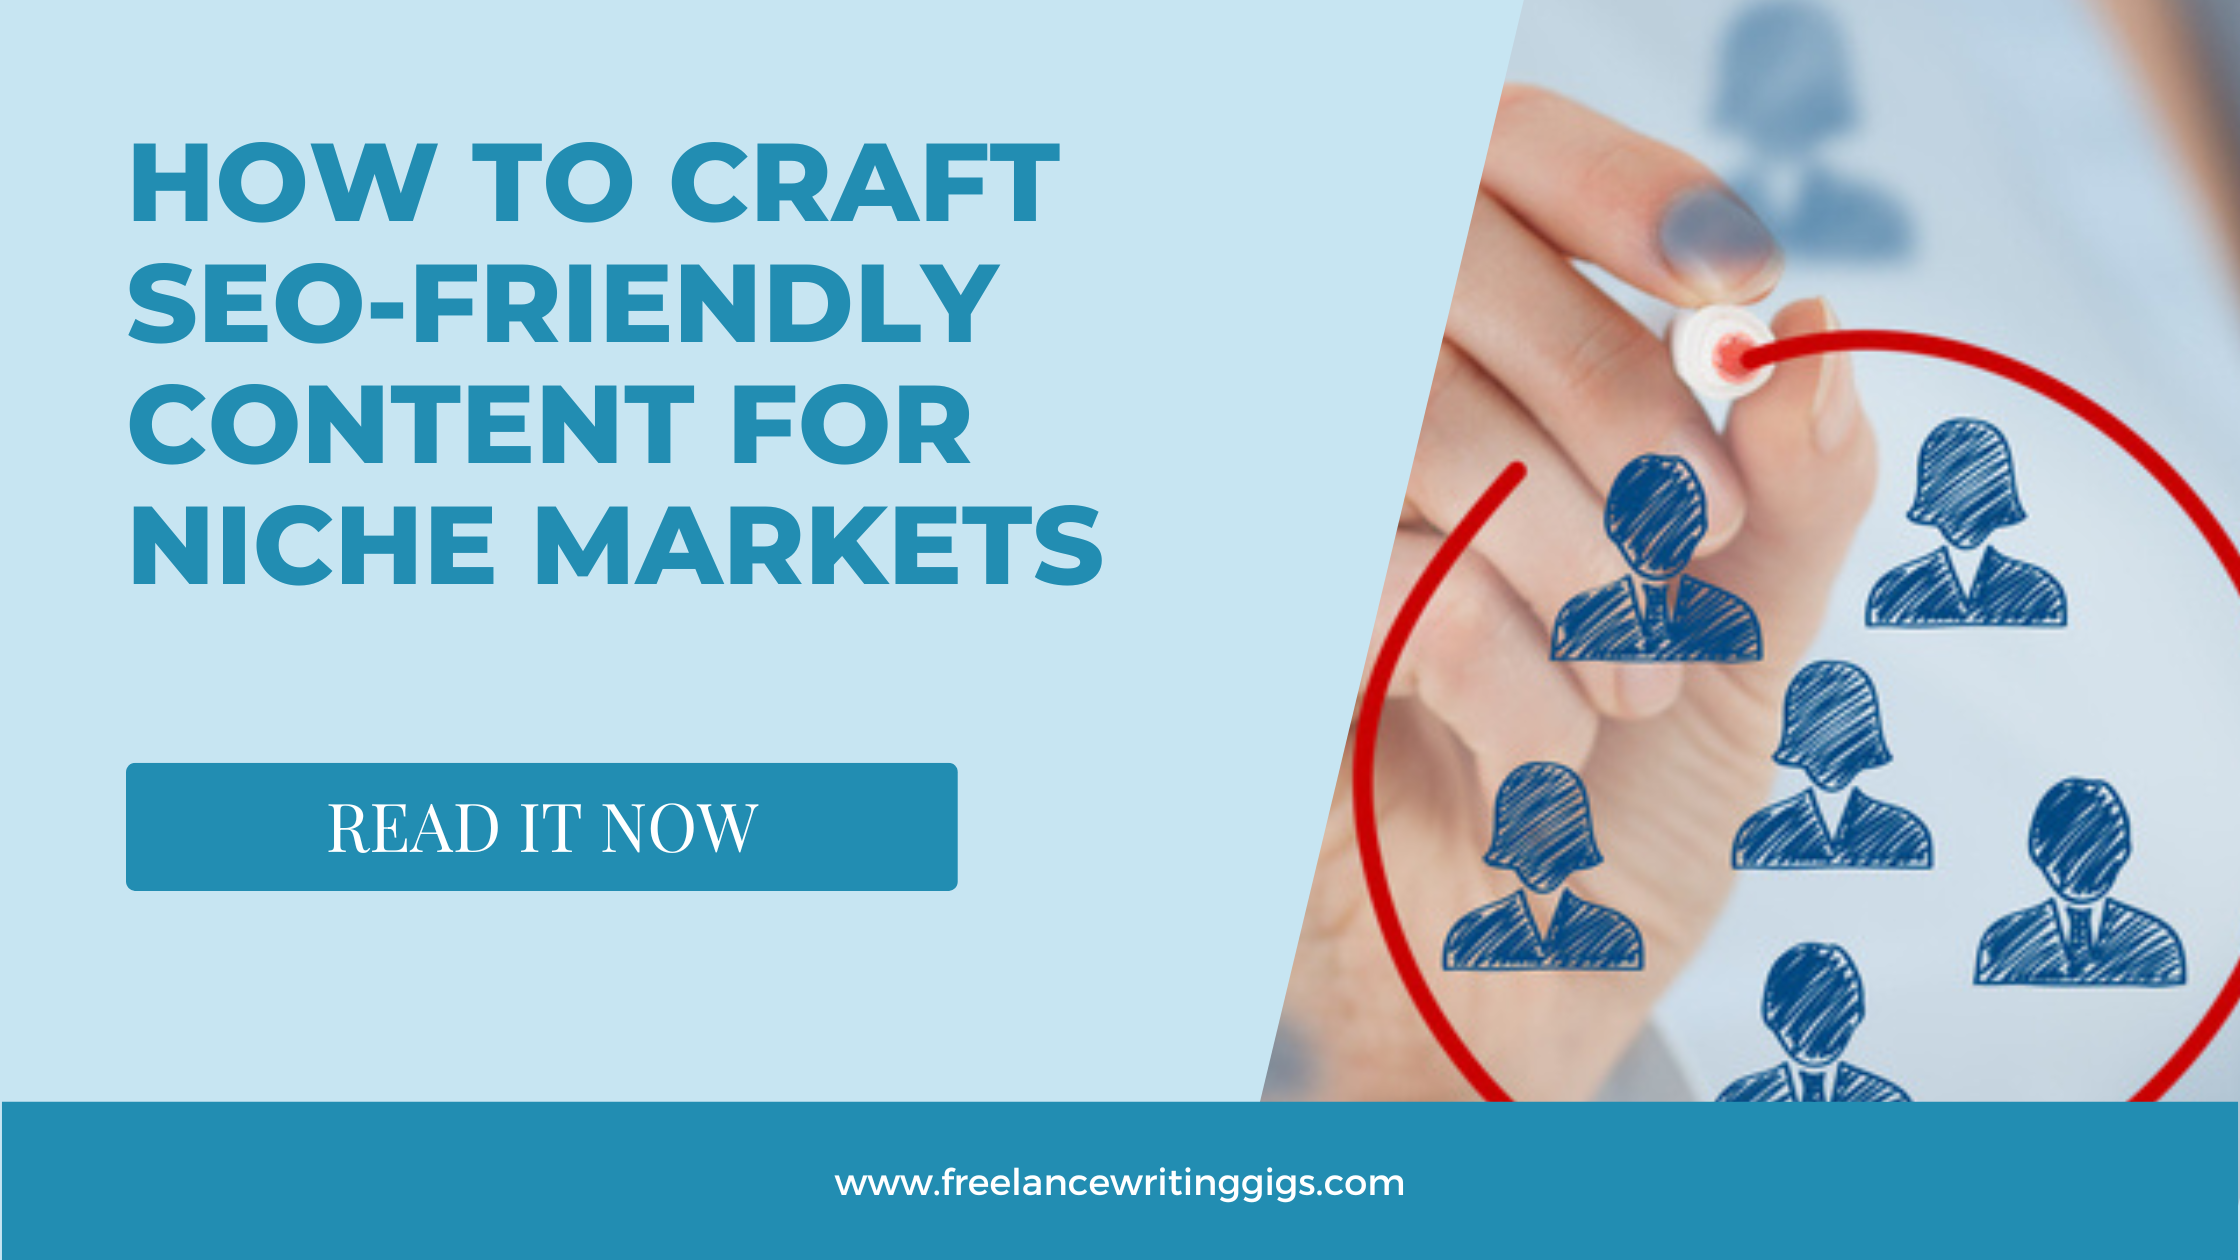 How to Craft SEO-Friendly Content for Niche Markets